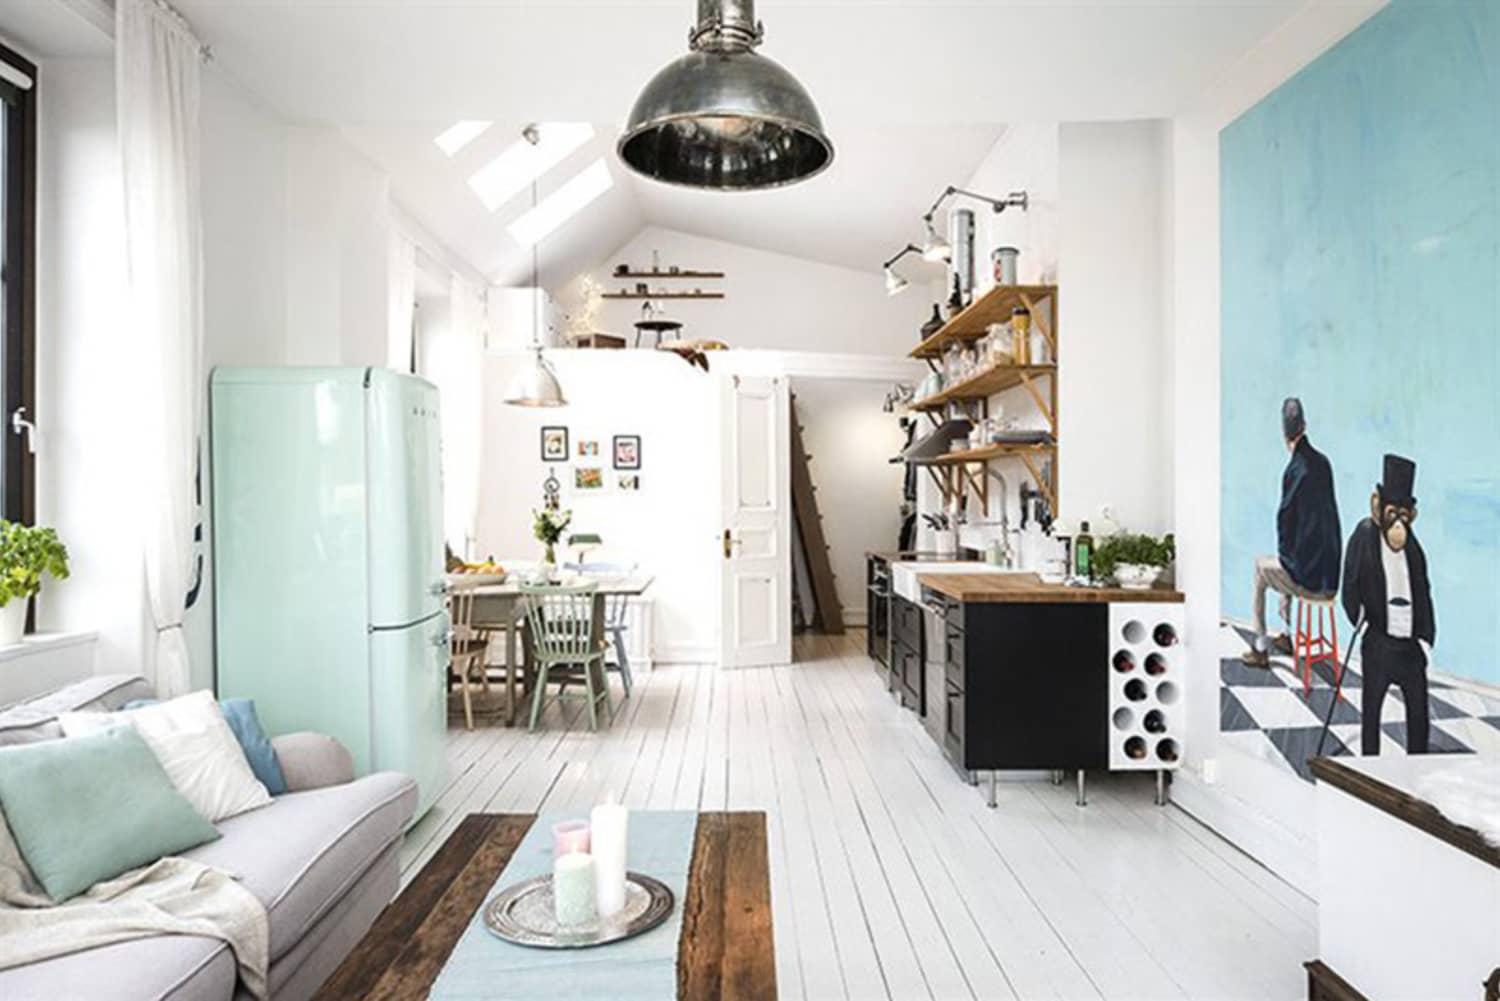 This Tiny Swedish Apartment Has Everything You Could Want—in Under 500 Square Feet